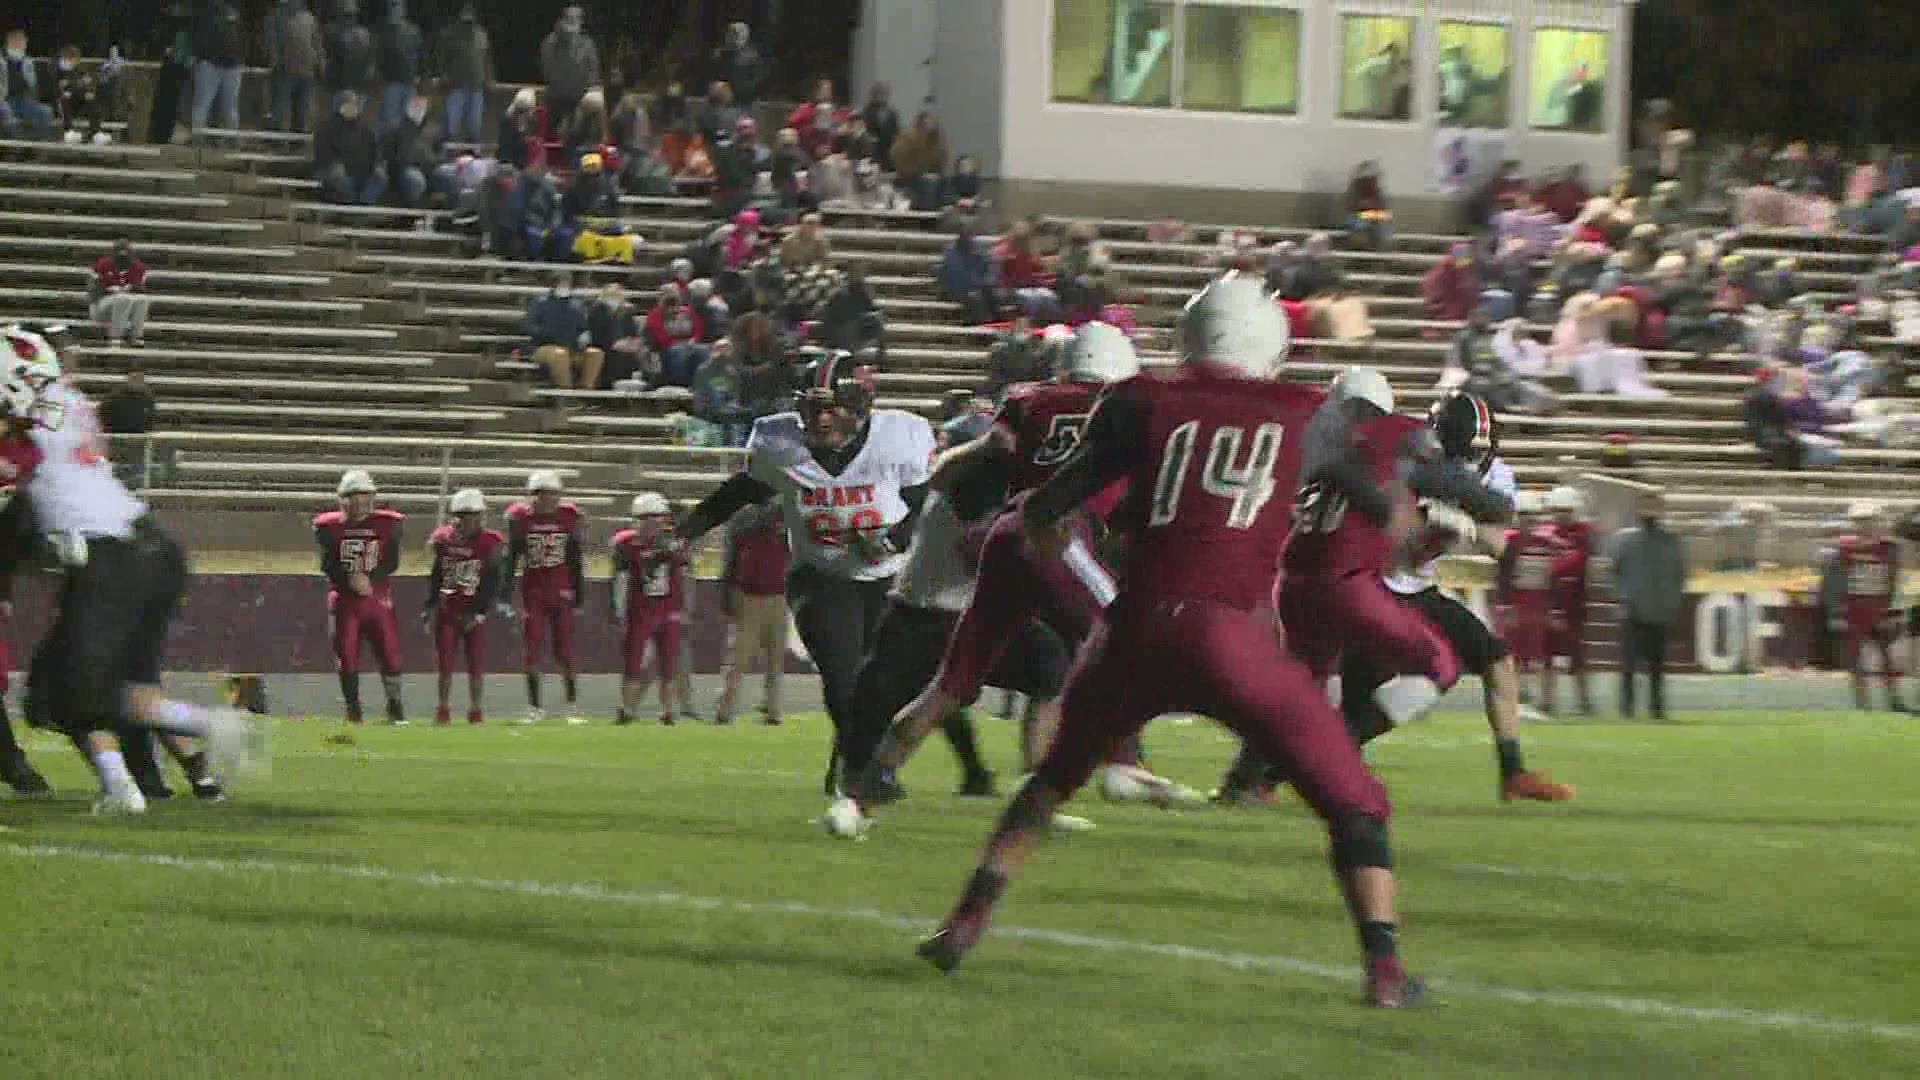 Highlights from playoff action between Grant and Orchard View.